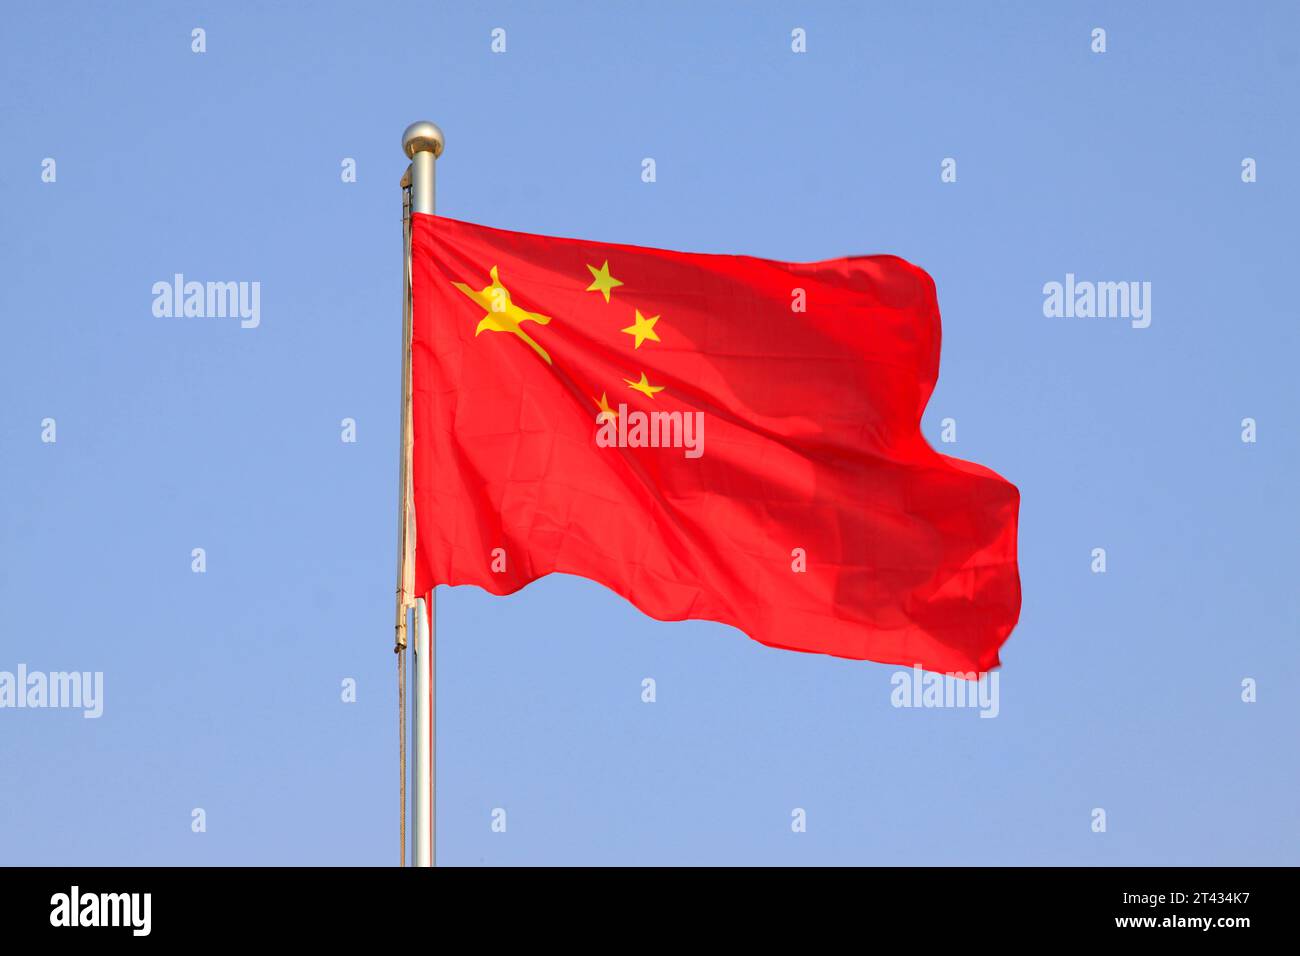 flag of the Republic of China, waving in the blue sky. Stock Photo